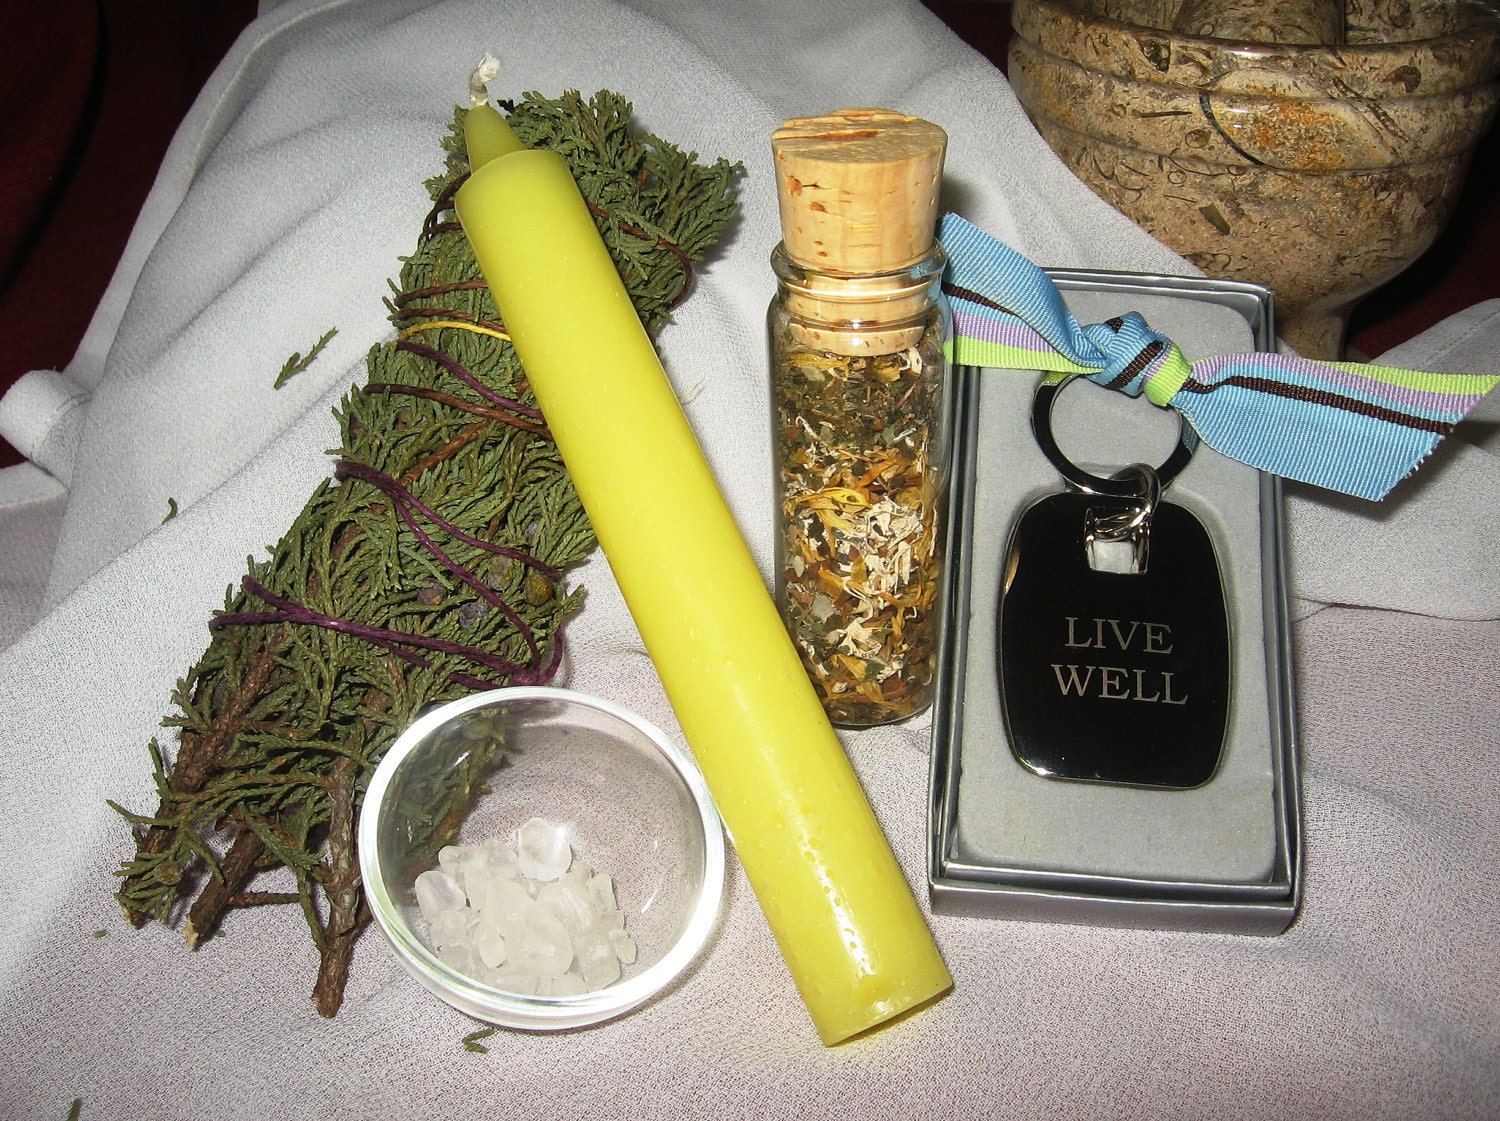 Deluxe New Home Cleansing and Blessing Spell Kit - OOAK